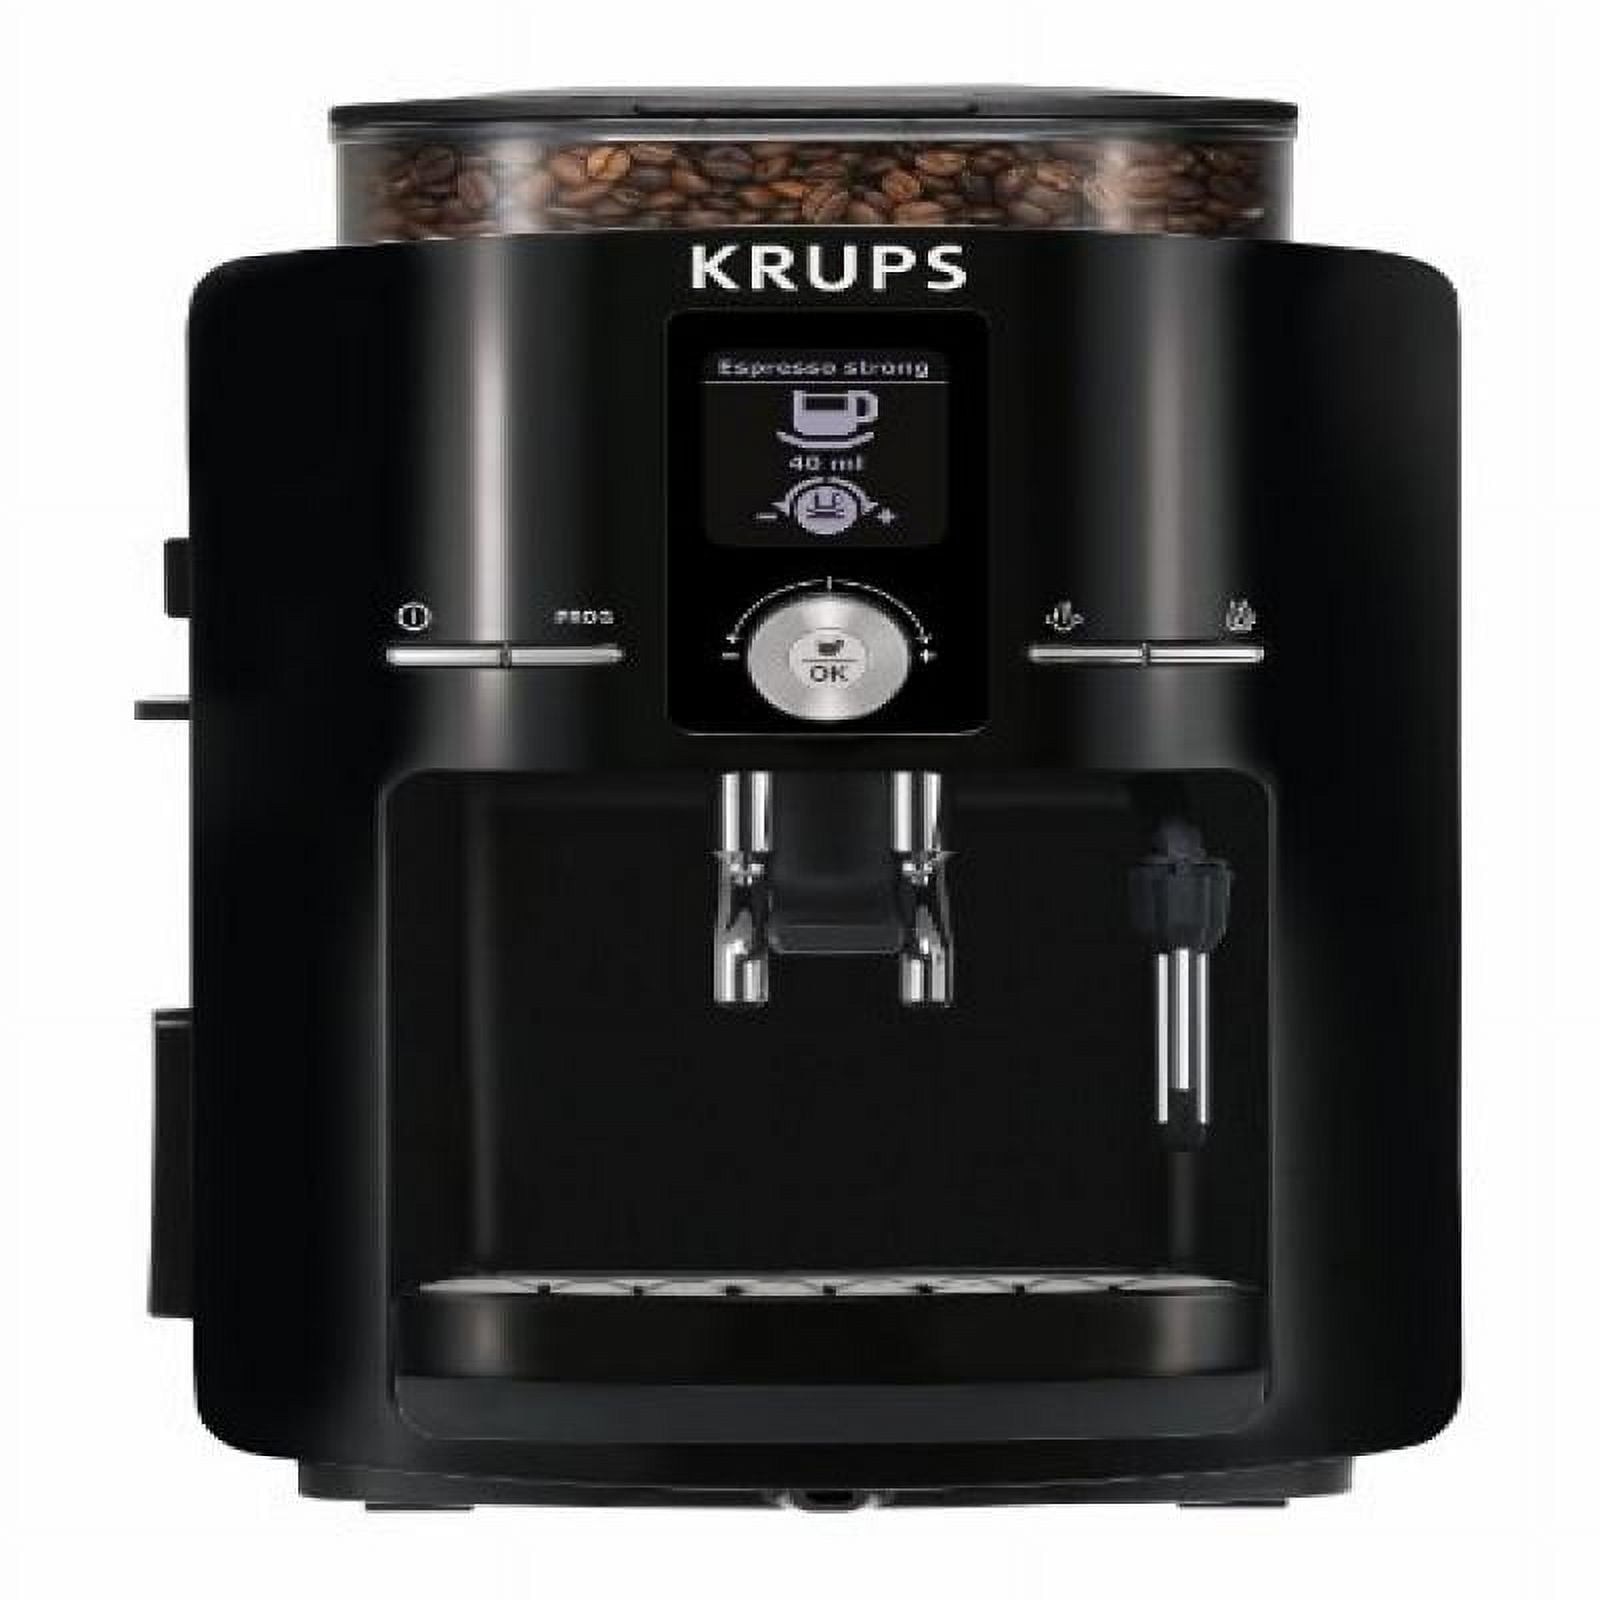 KRUPS IL Barista #220 Burr Coffee Grinder With Attachments For Portafilter